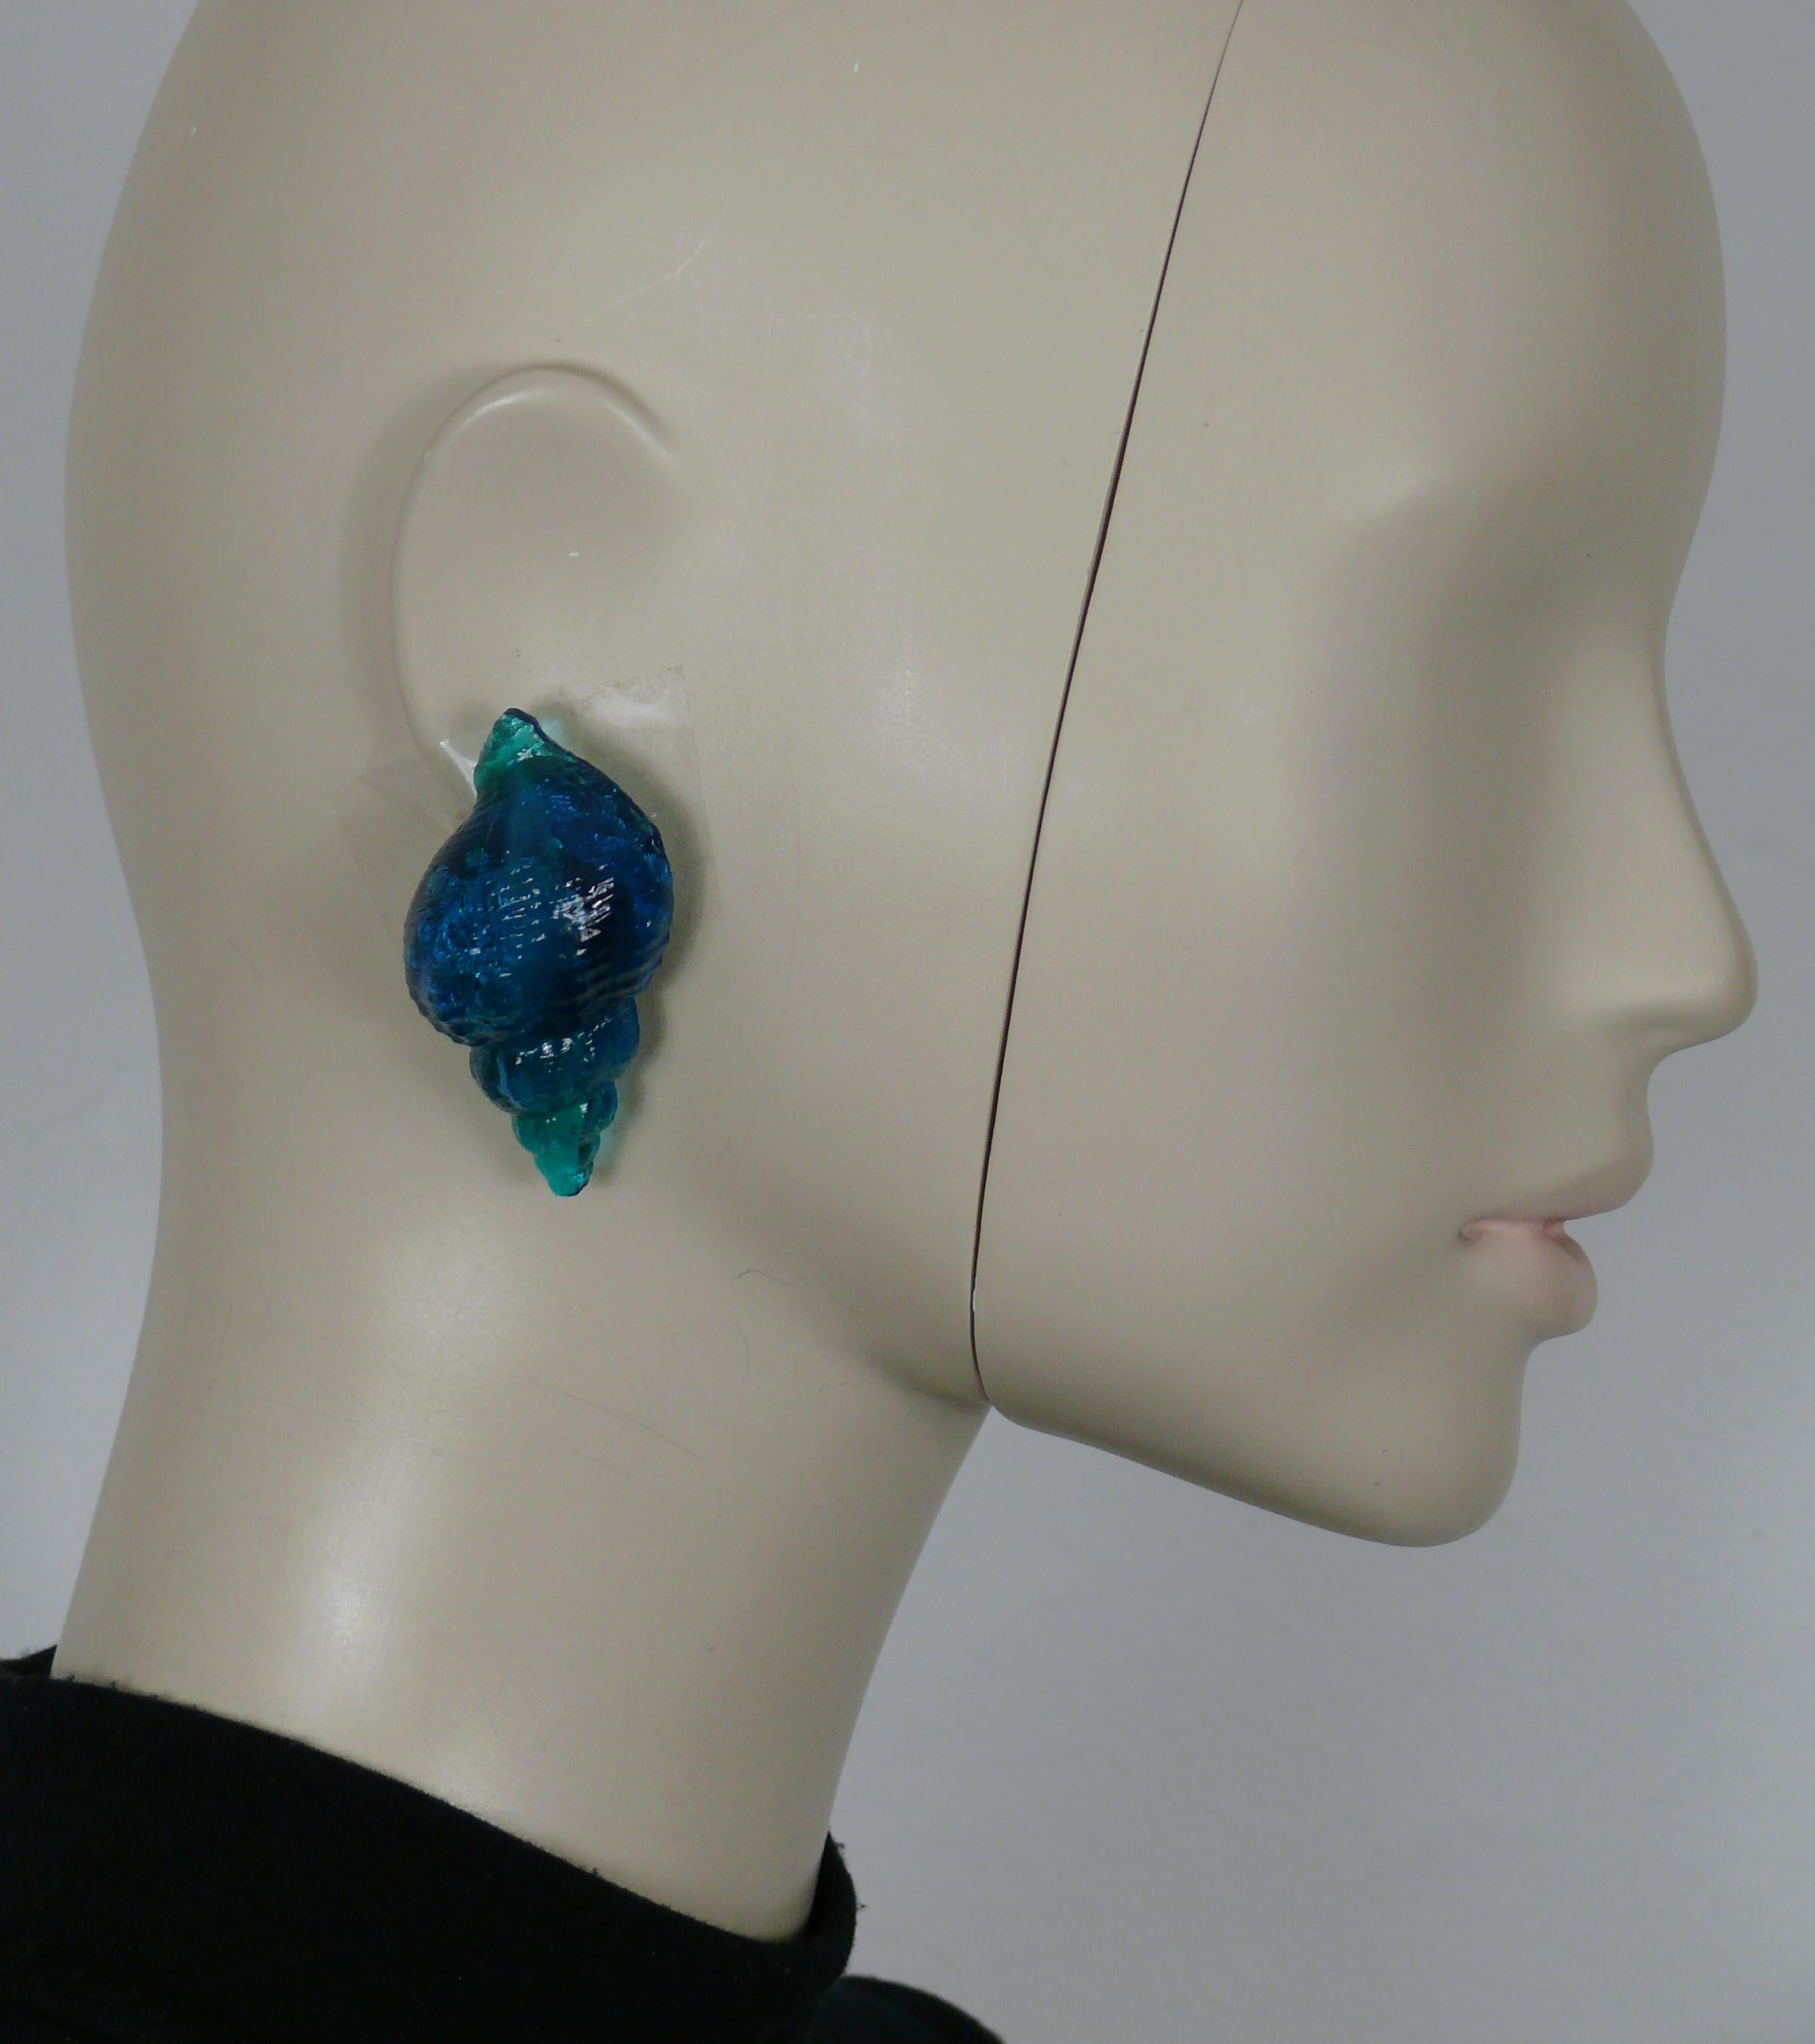 ROCHAS vintage massive 3D sea shell shaped resin clip-on earrings in hues of blue and green.

Marqued ROCHAS Paris.

Indicative measurements : height approx. 5.5 cm (2.17 inches) / max. width approx. 3.1 cm (1.22 inches).

Weight per earring :